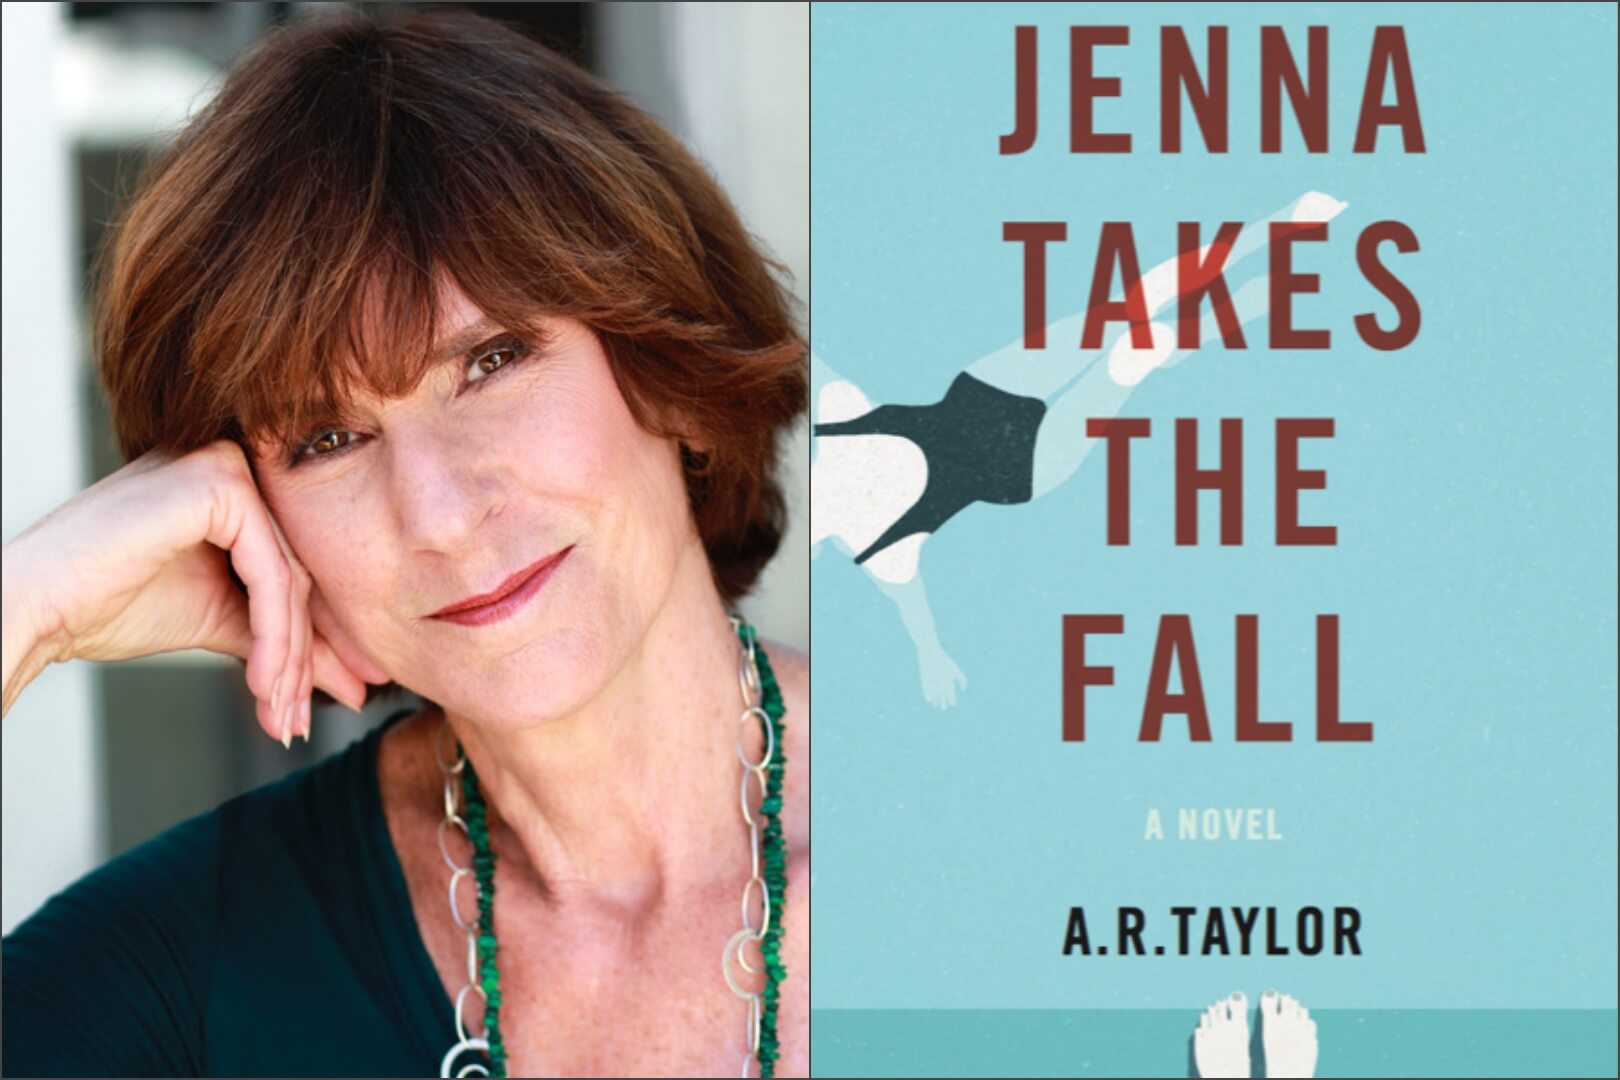 Q&A with A. R. Taylor, Author of Jenna Takes The Fall